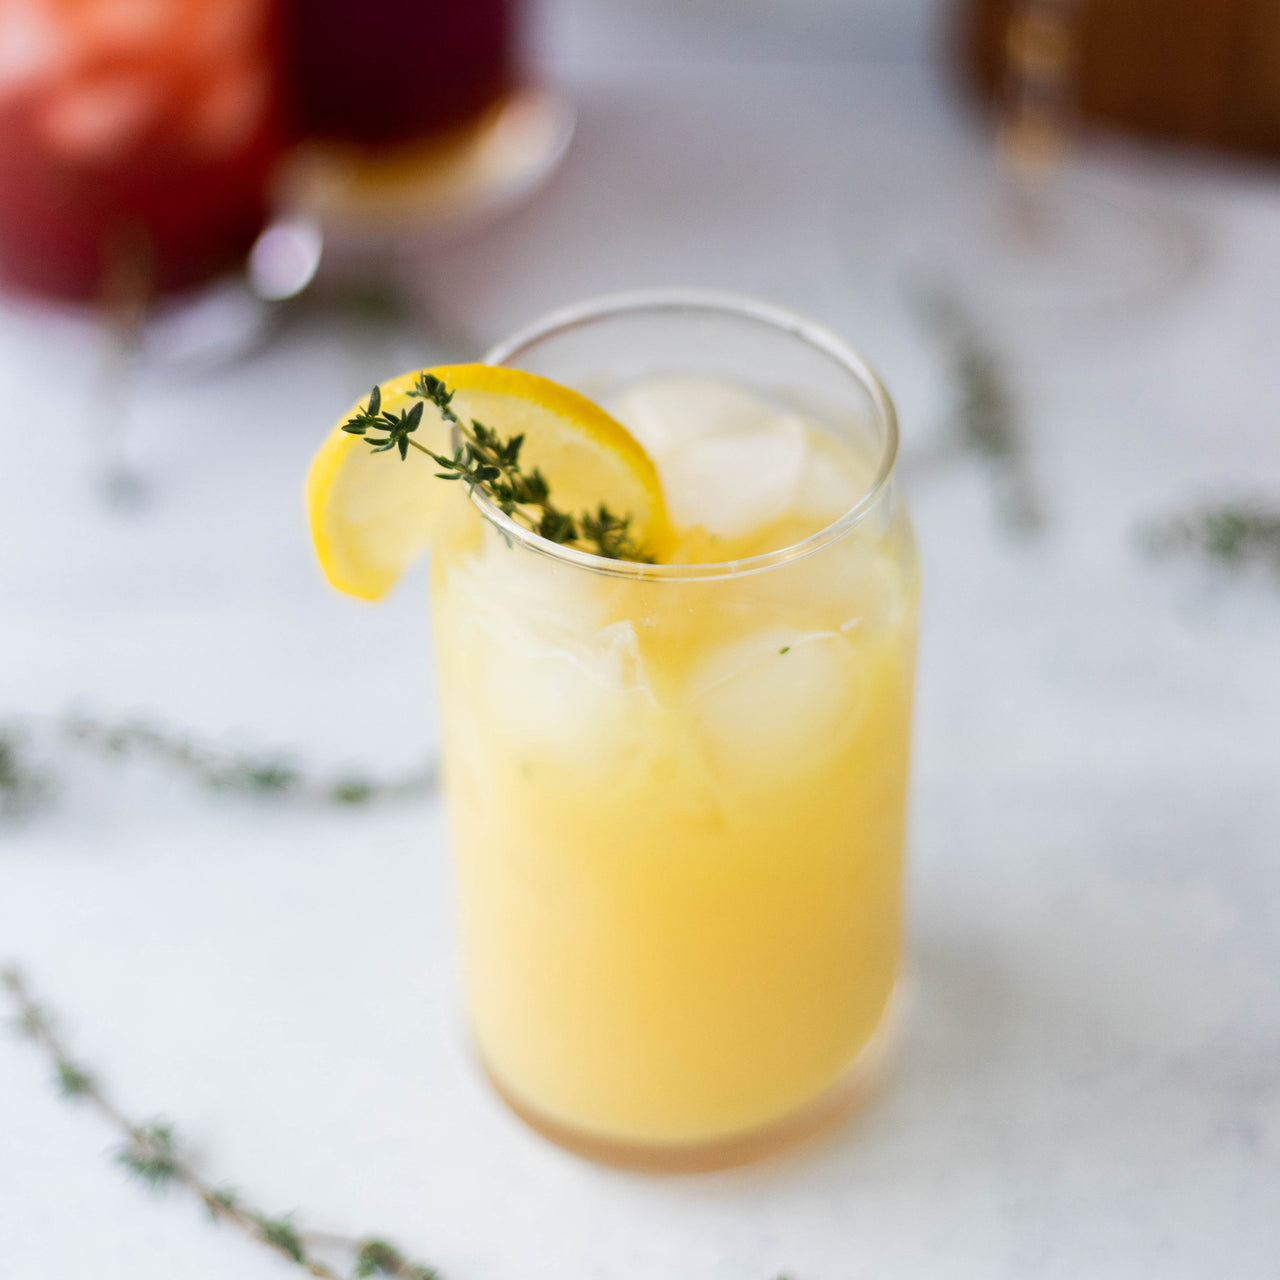 Ginger Thyme Tonic in glass with lemon wedge